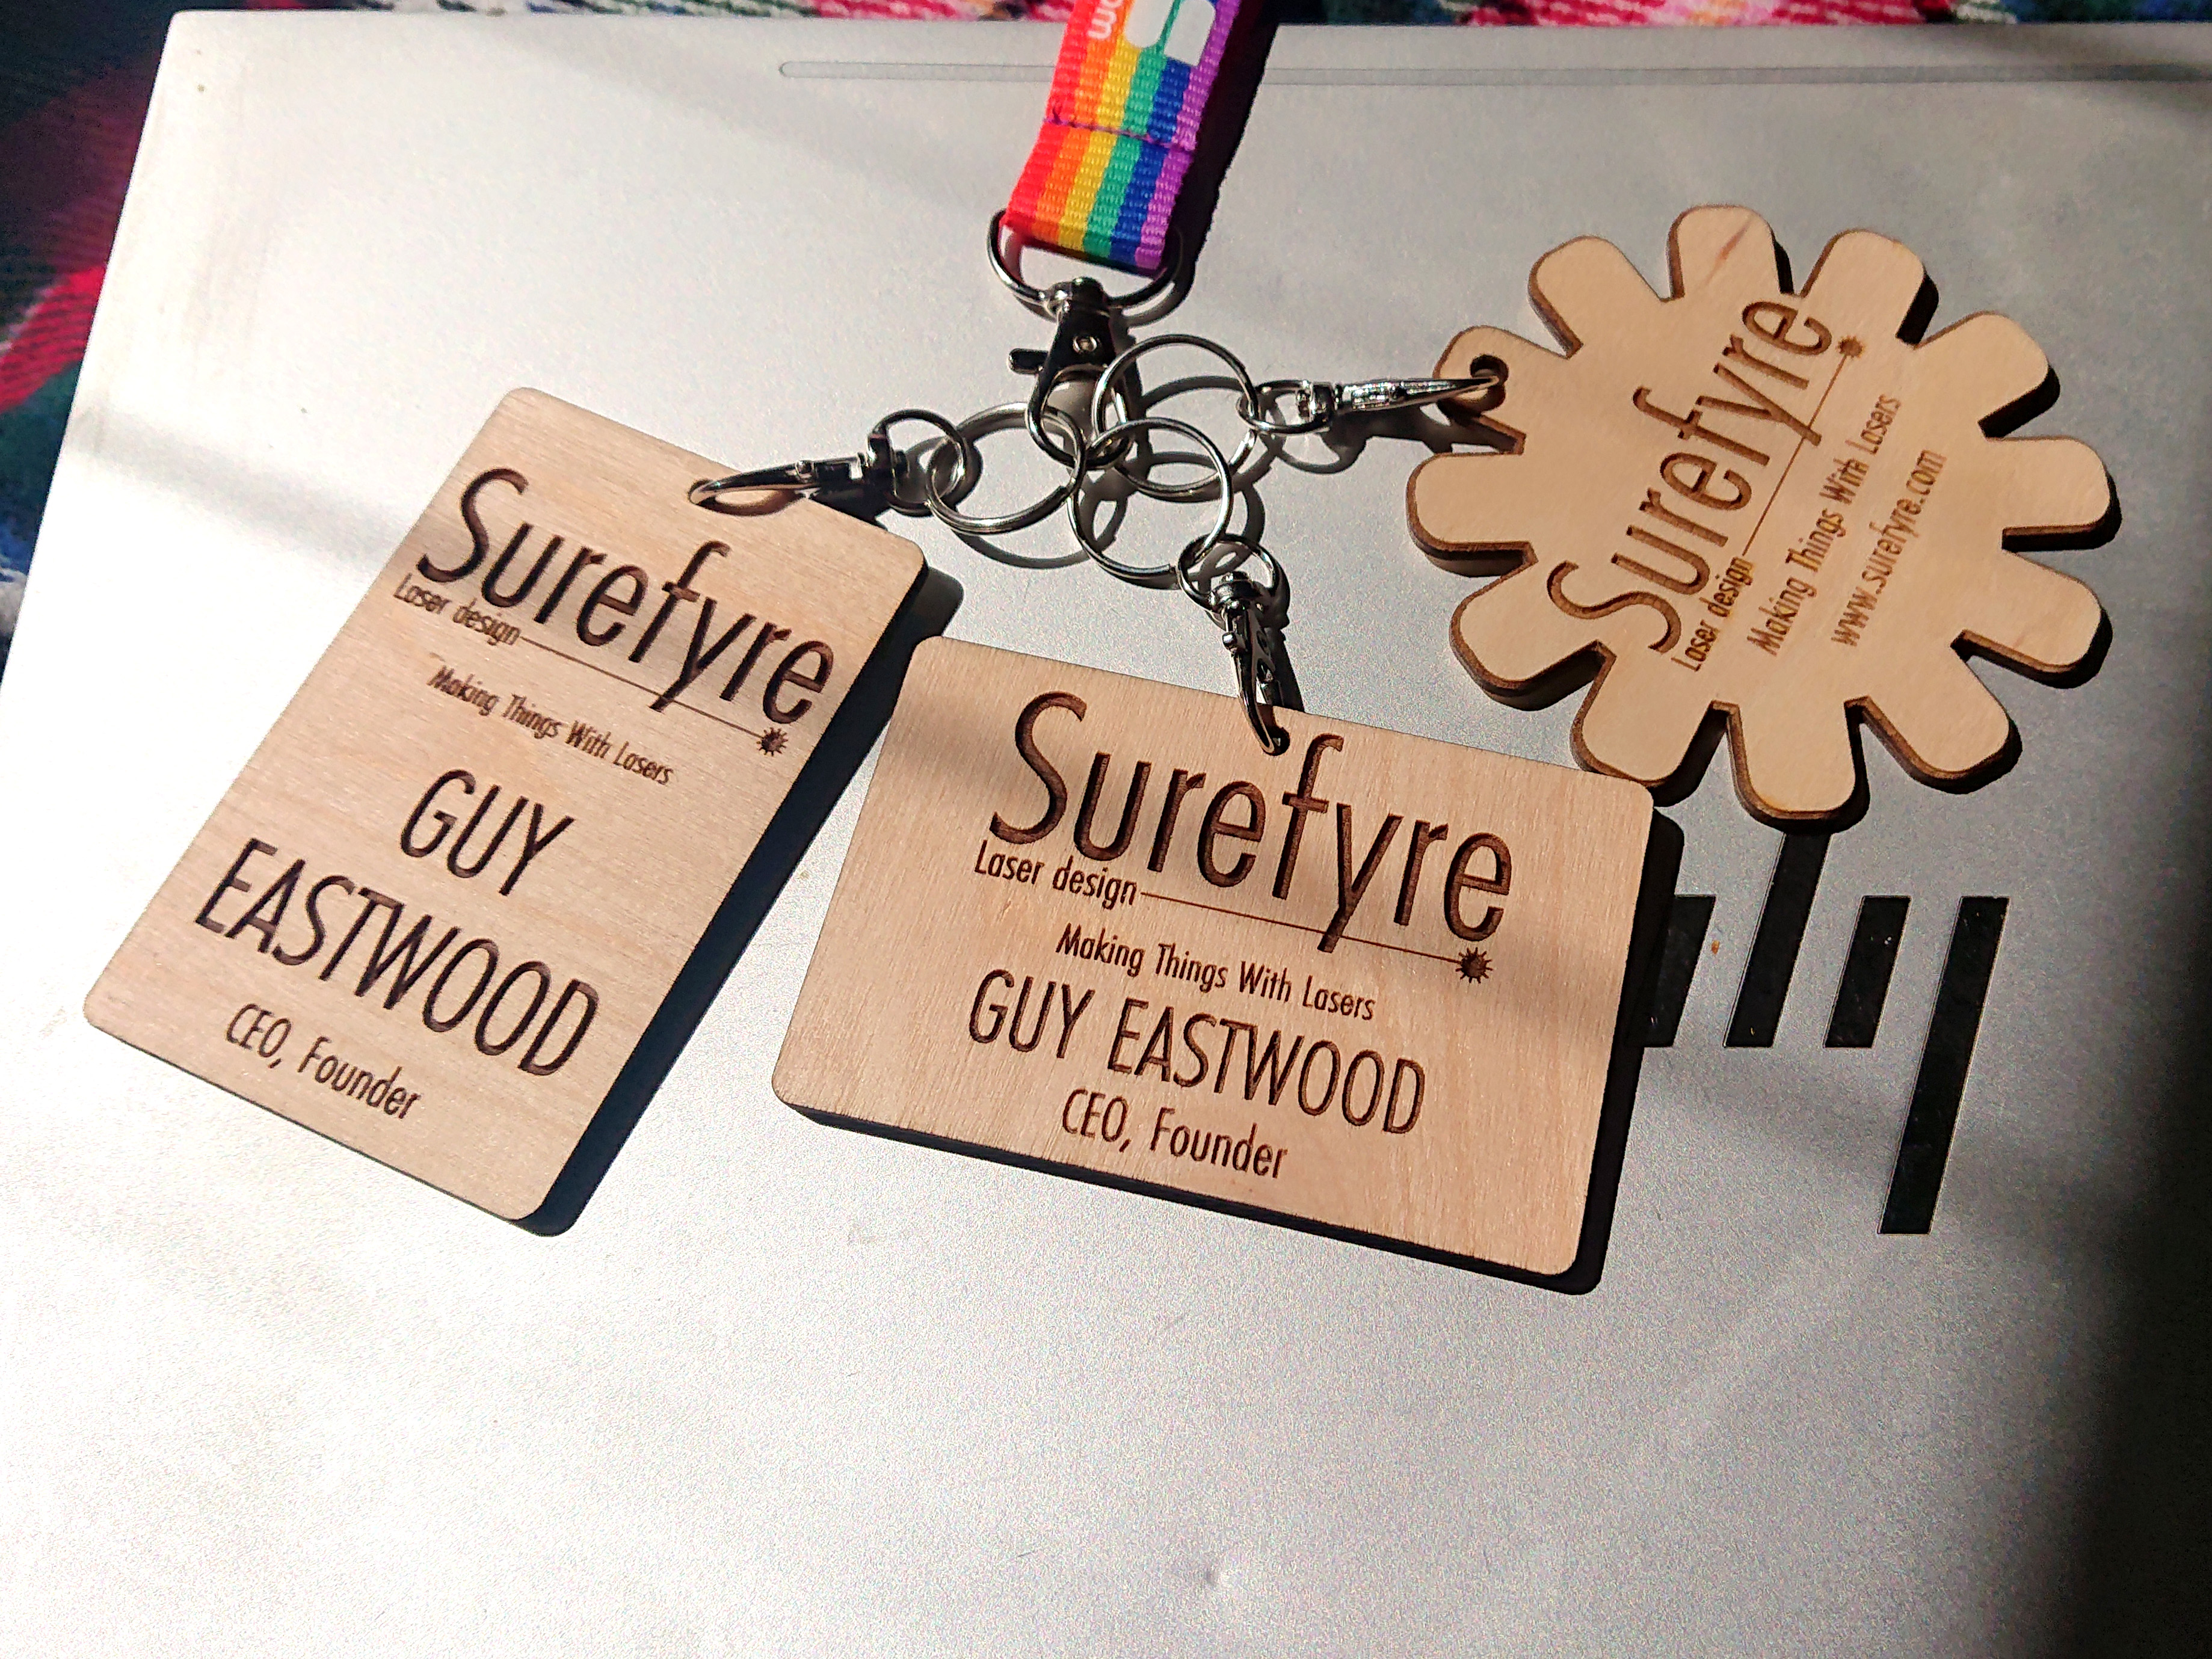 New wooden contactless business tags from Surefyre Laser Design